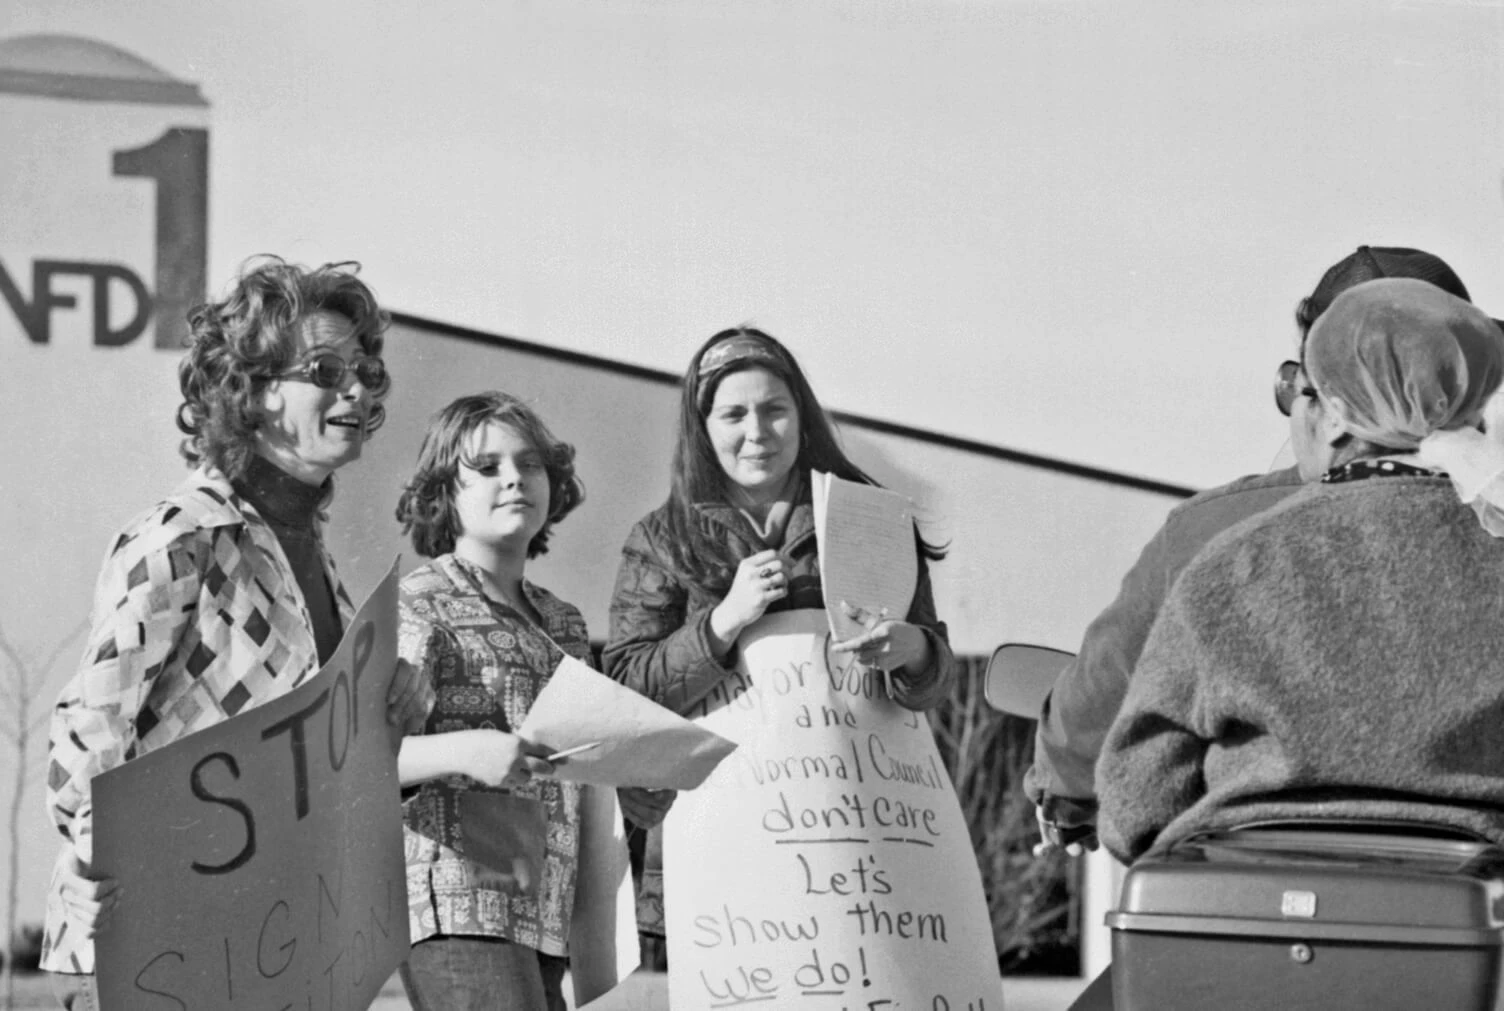 Black and white photo of four women holding poster board signs in front of a building.